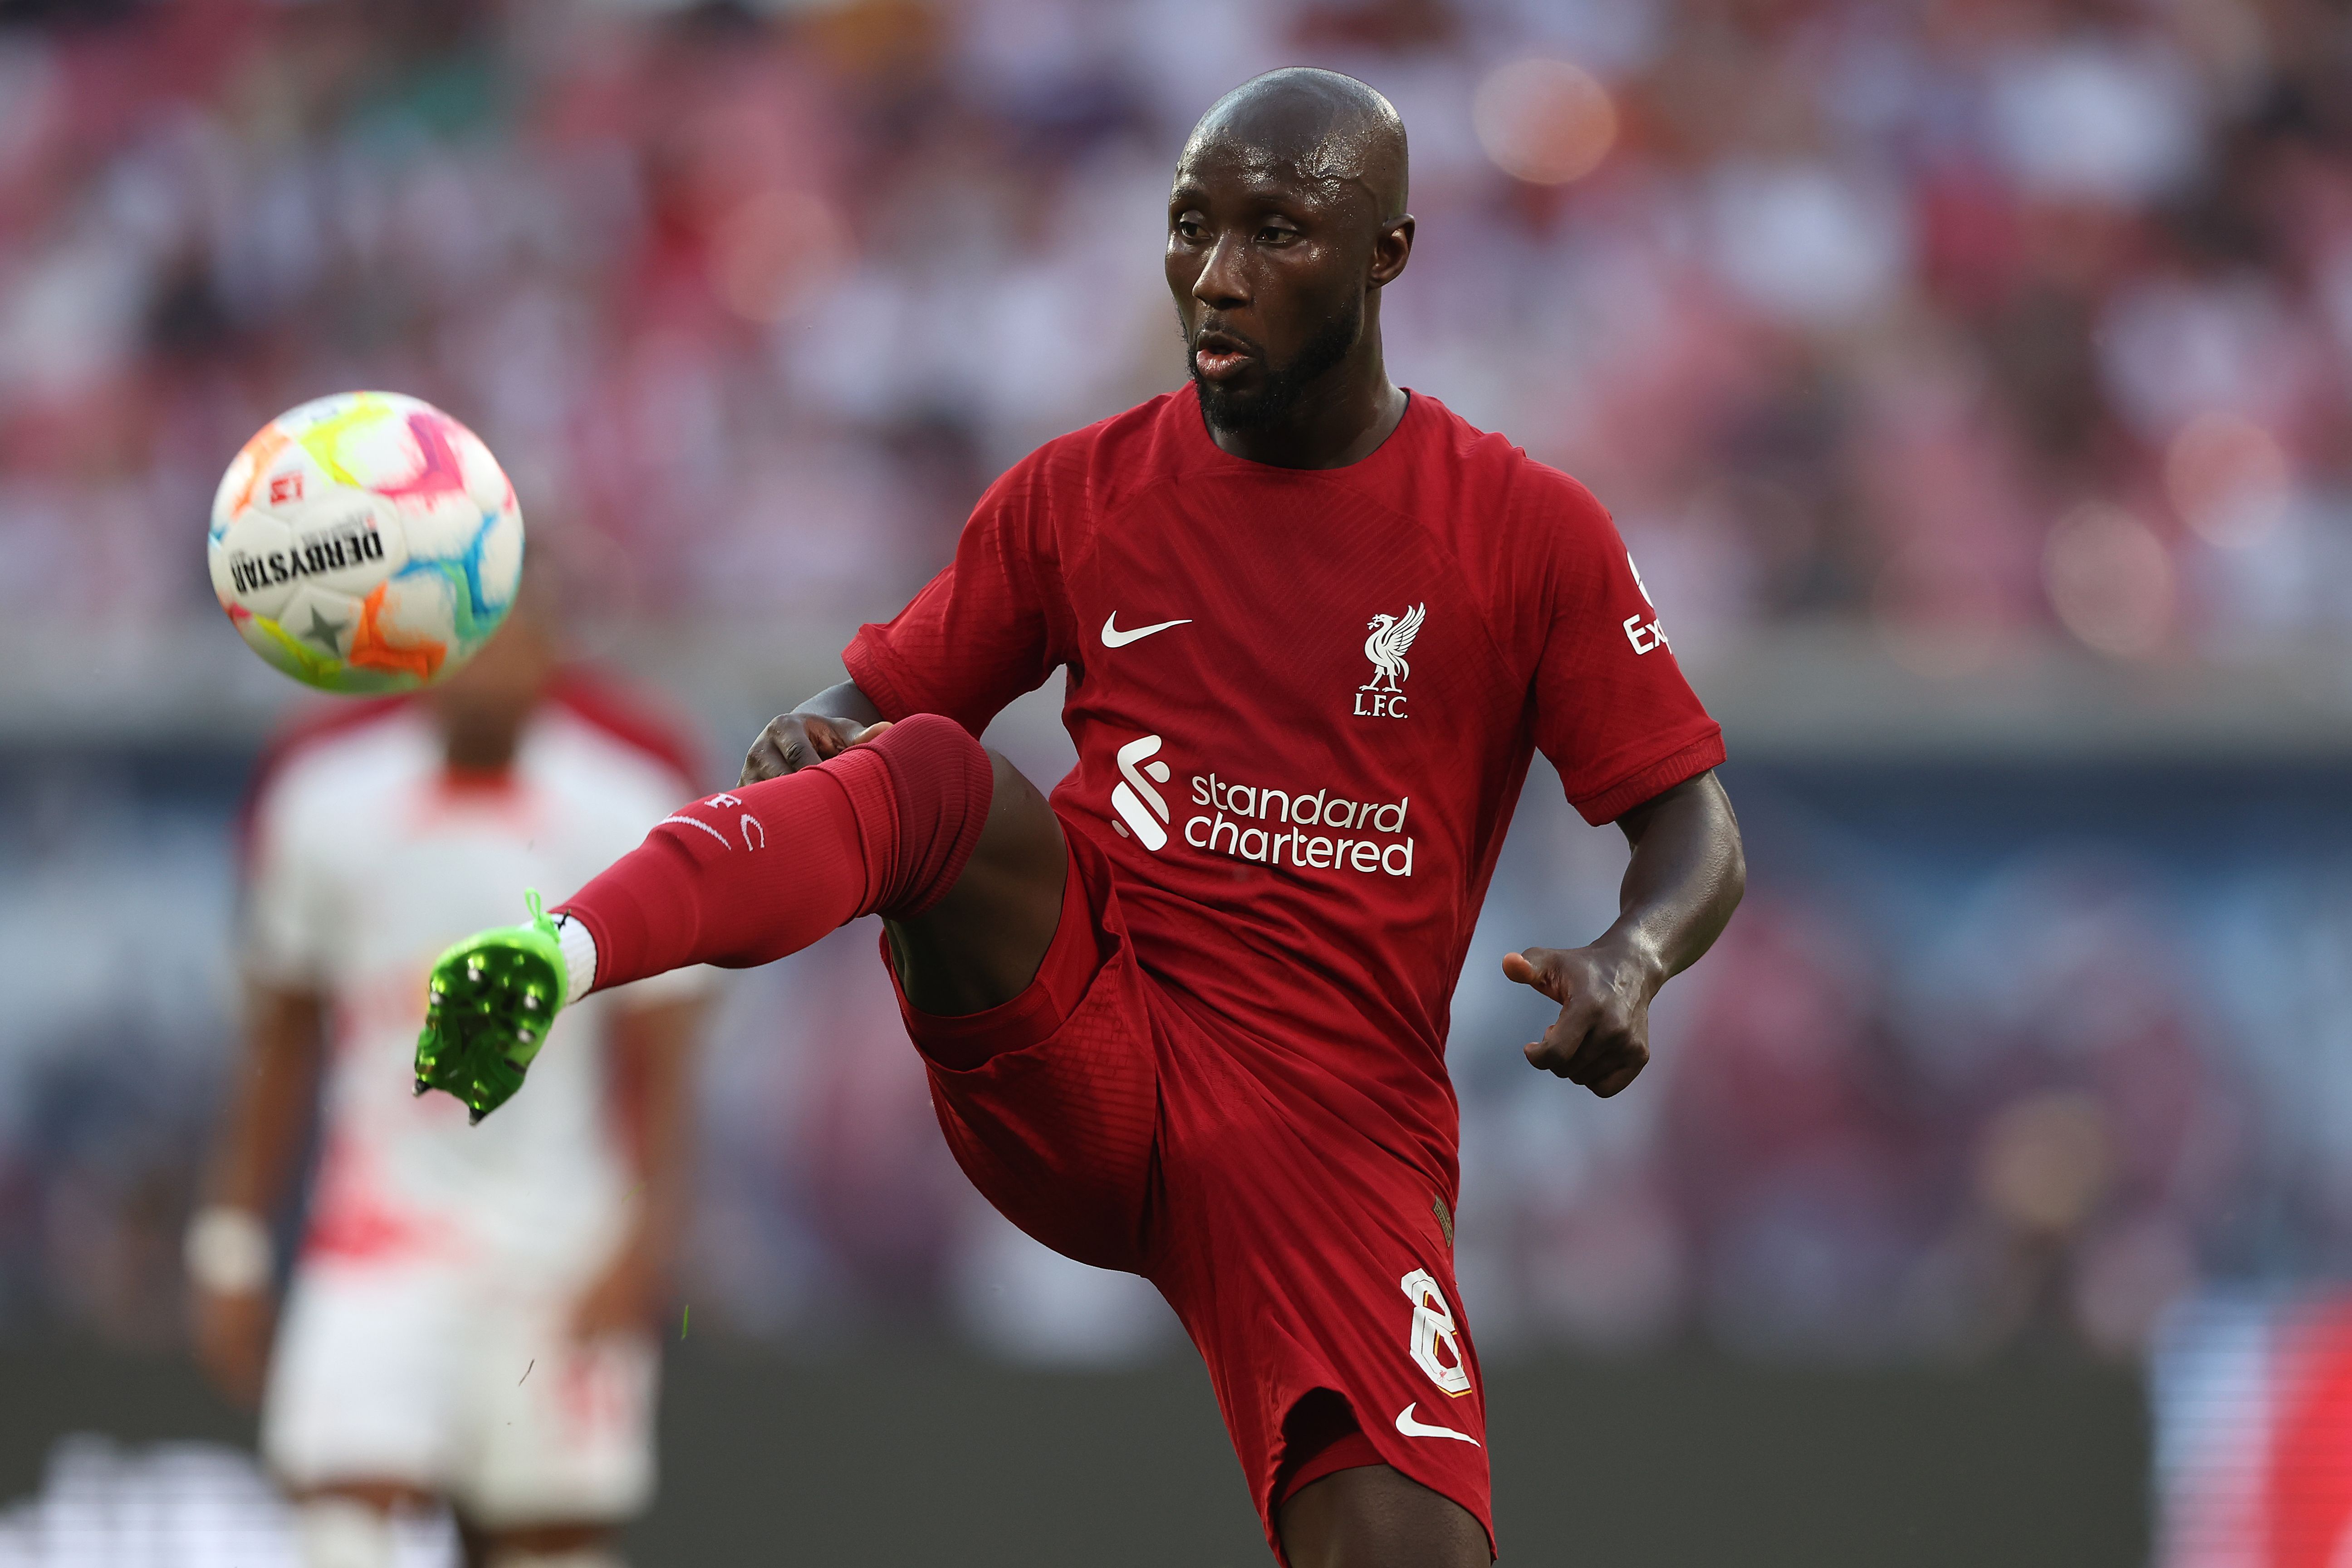 Naby Keita’s agents have expressed unhappiness, despite what Liverpool mouthpieces say